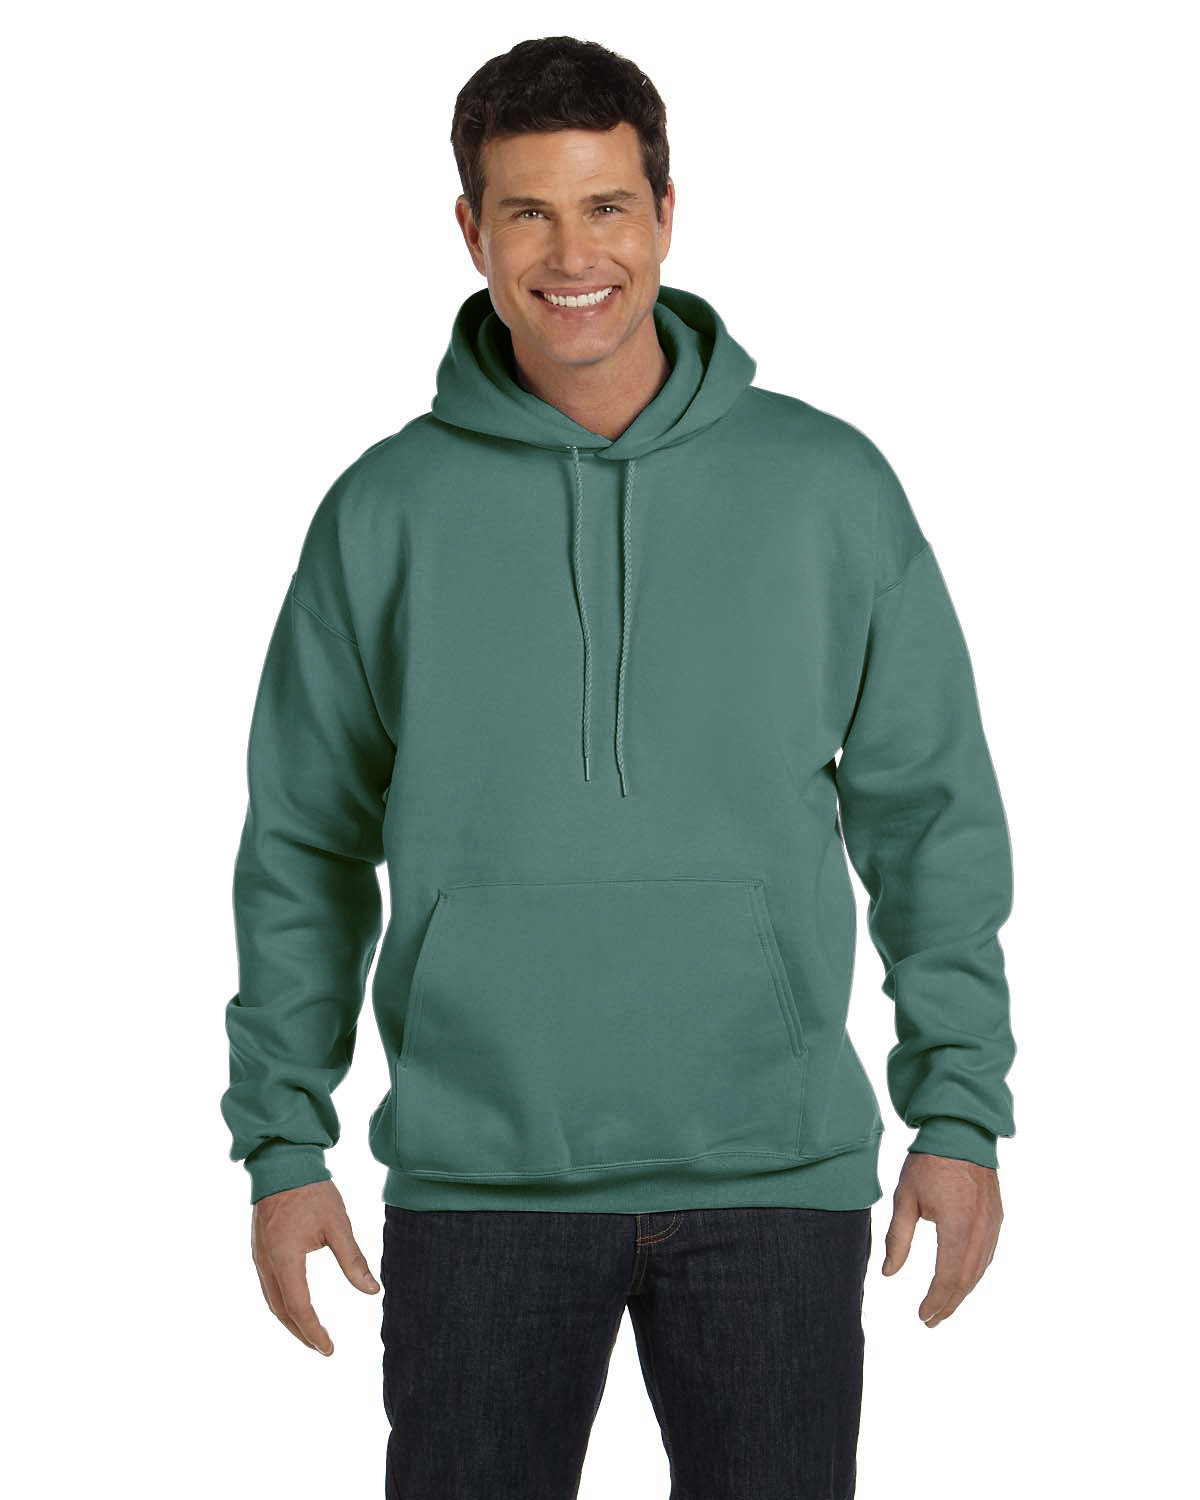 https://images.shirtspace.com/fullsize/hdctLLogV%2BHRQGTSraLCMw%3D%3D/356155/1184-hanes-f170-adult-9-7-oz-ultimate-cotton-90-10-pullover-hooded-sweatshirt-front-cactus.jpg